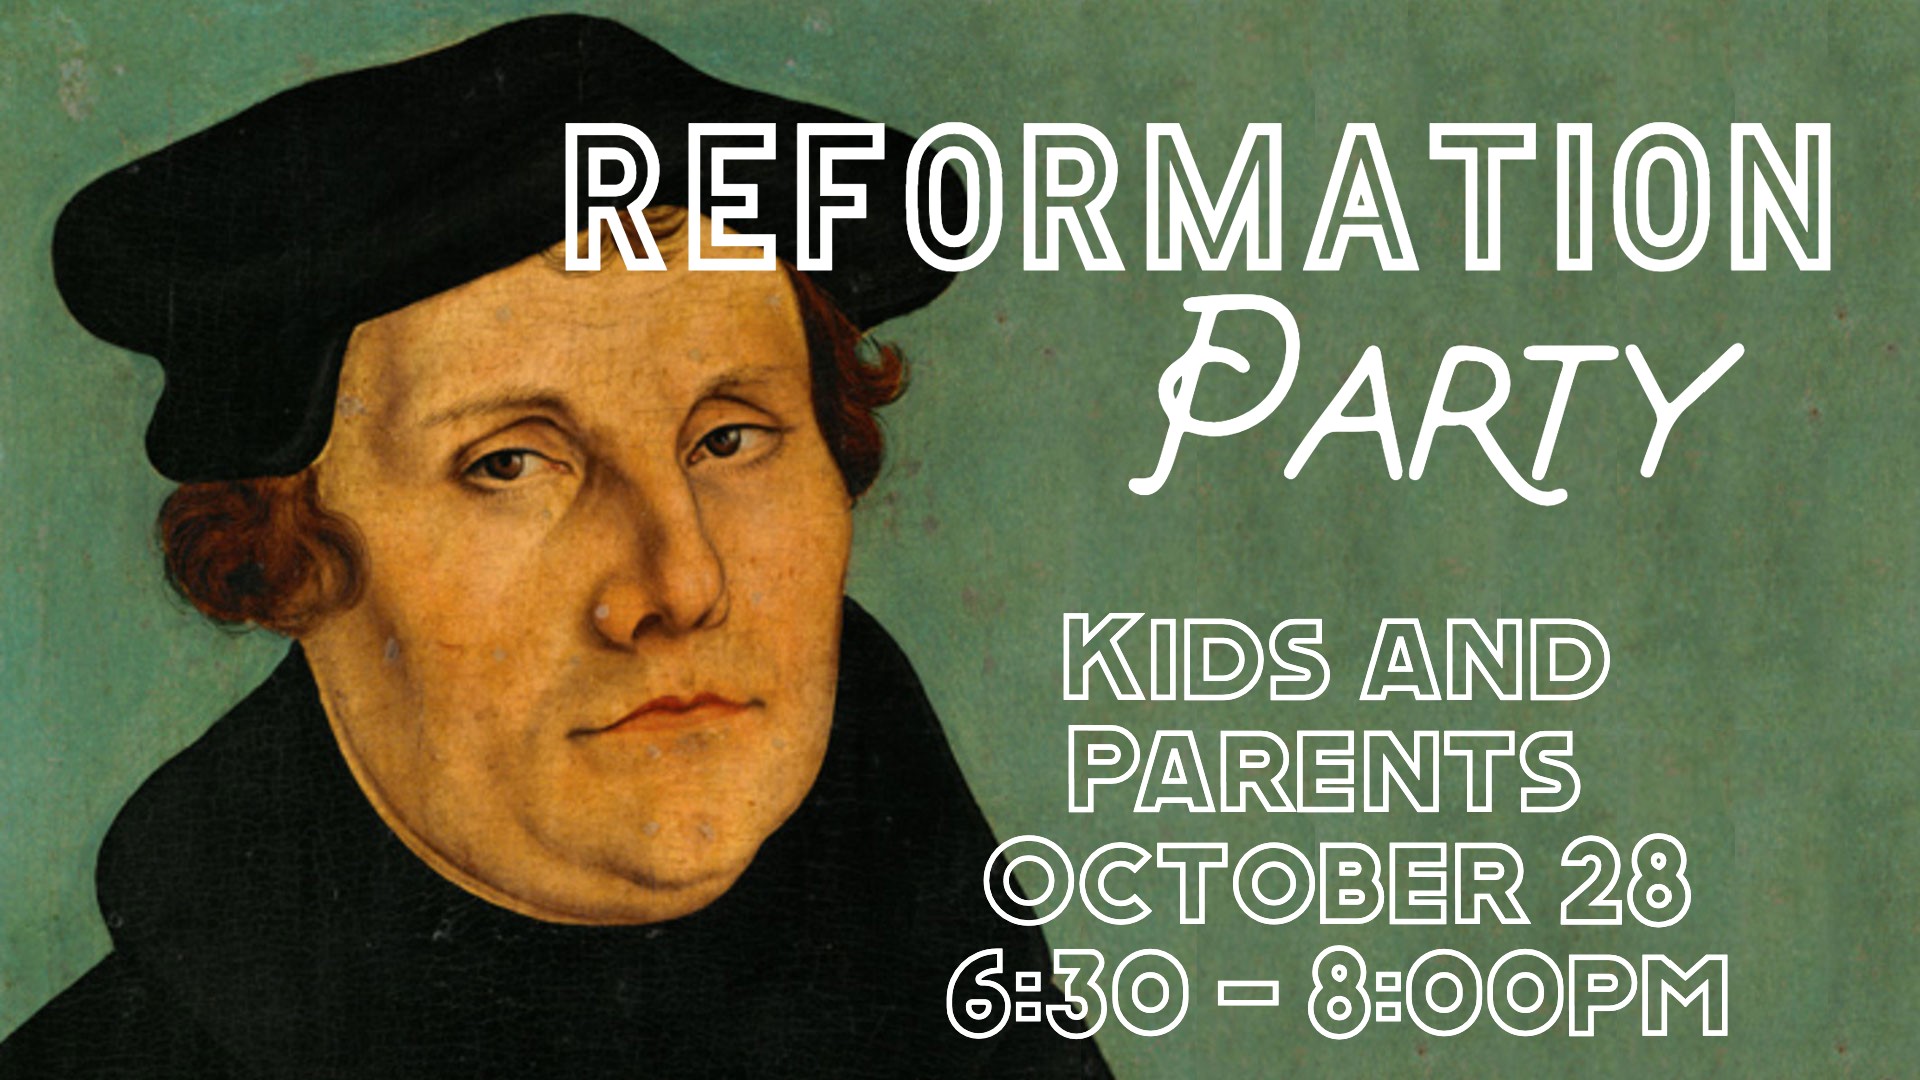 Join Us for a Reformation Party!